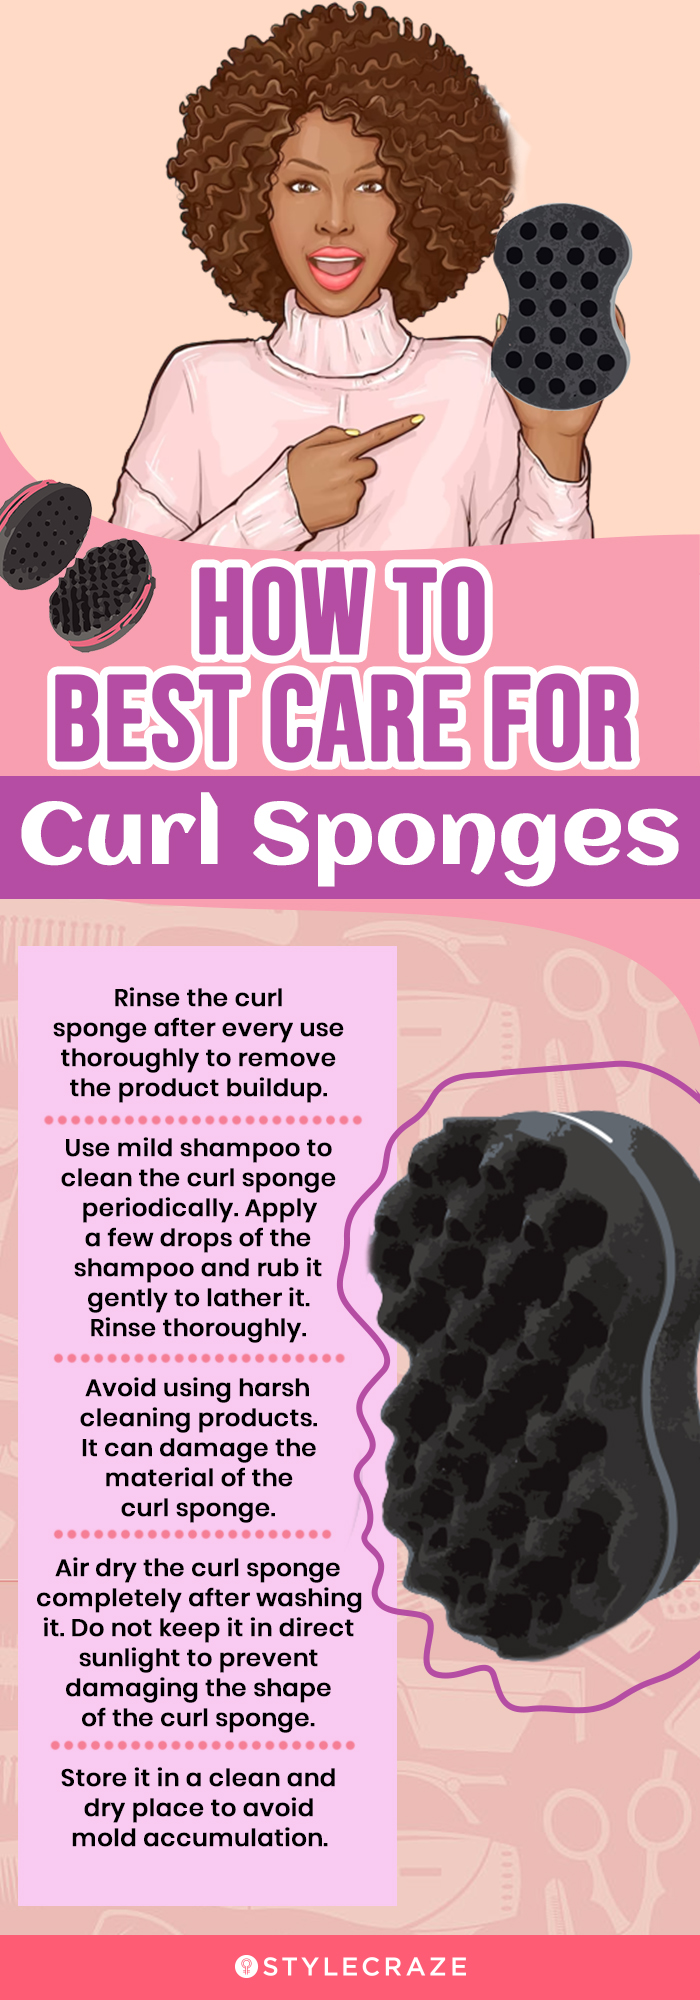 How To Best Care For Curl Sponge (infographic)